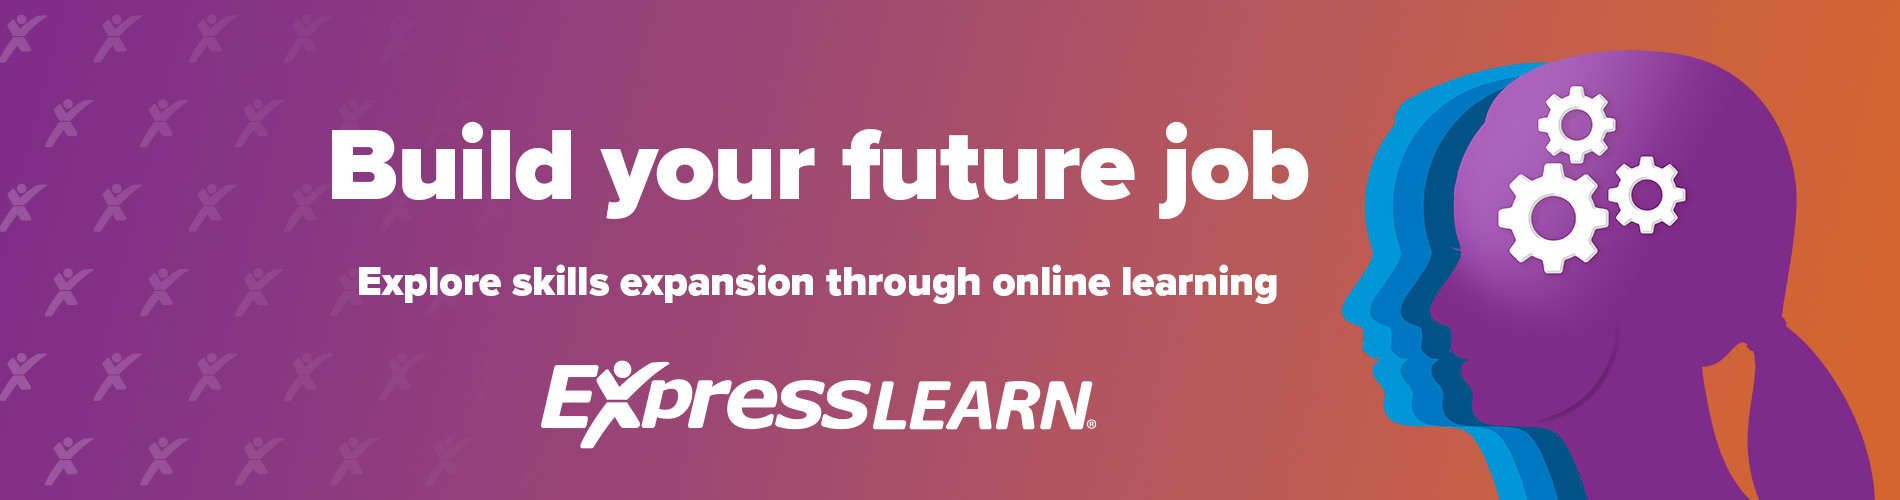 Build your future job with ExpressLearn